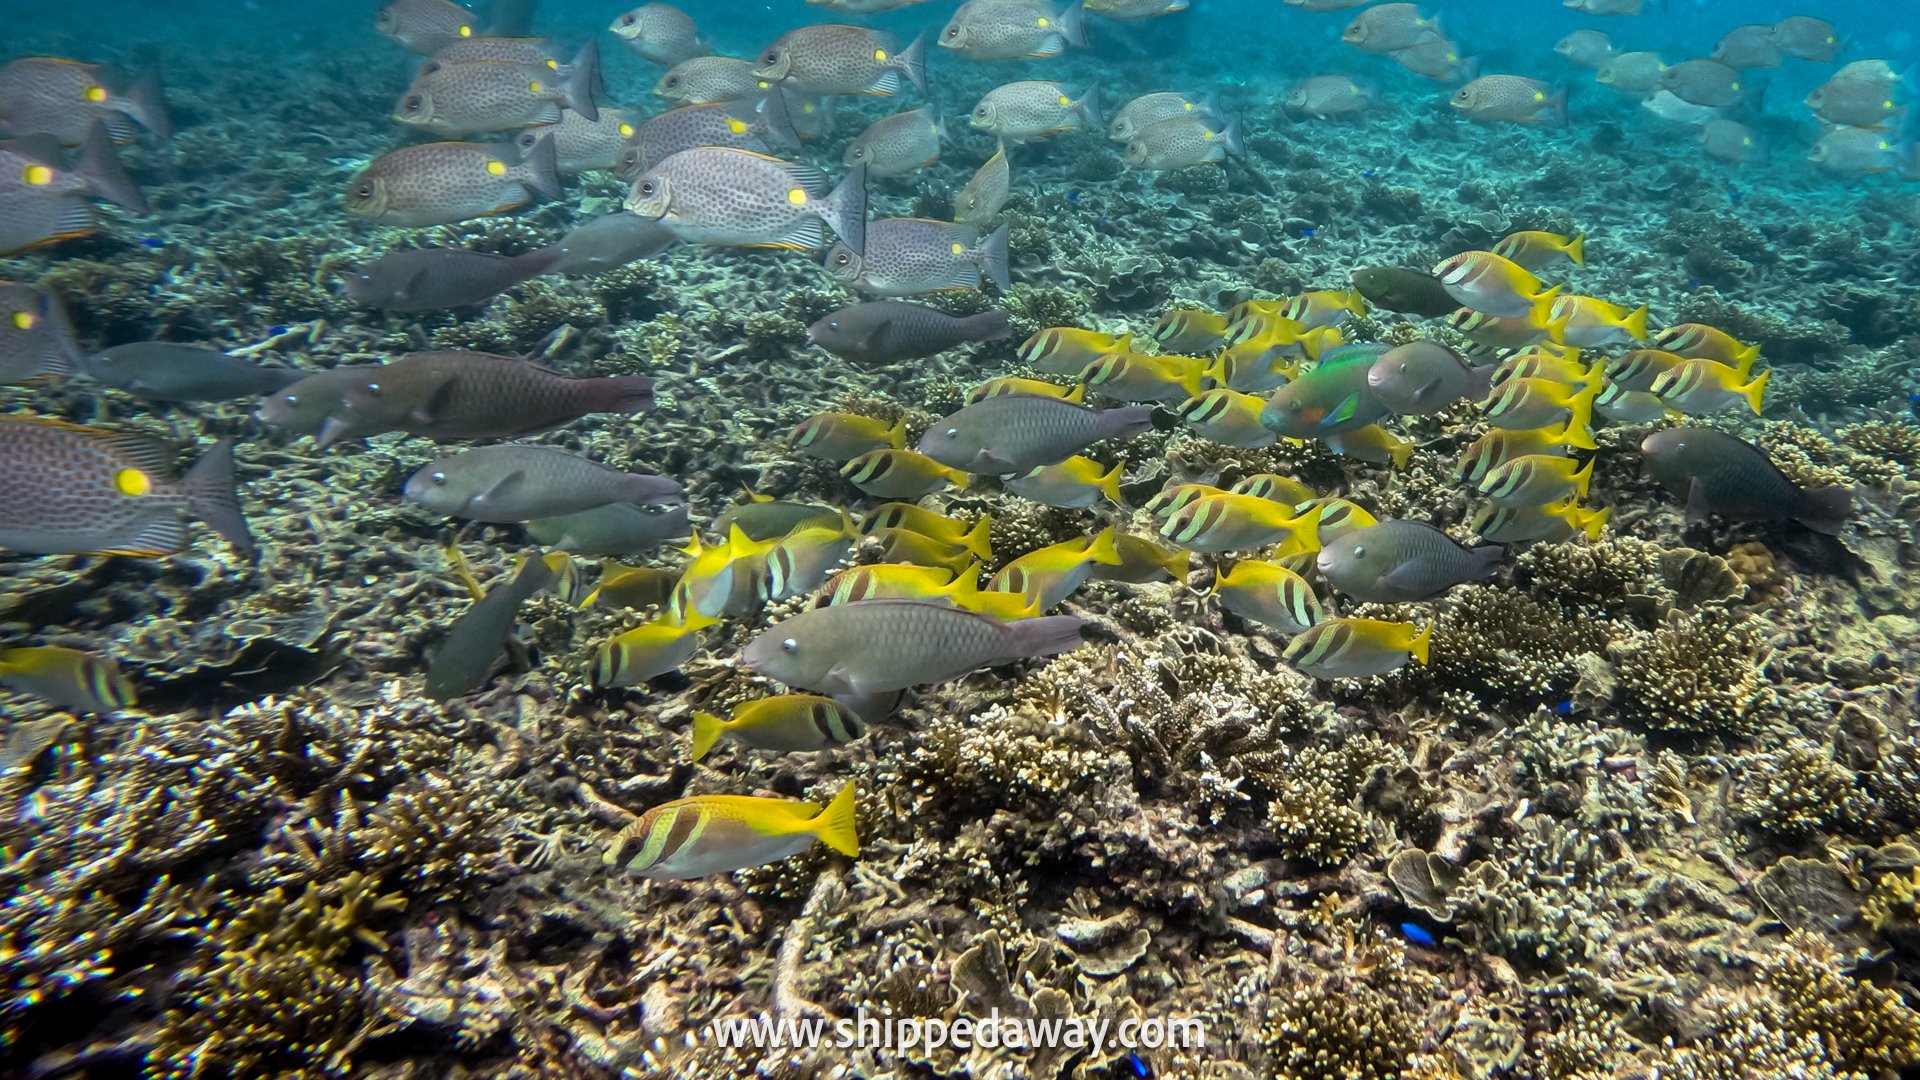 Snorkeling with fish on a day trip to Koh Nang Yuan from Koh Tao, Thailand